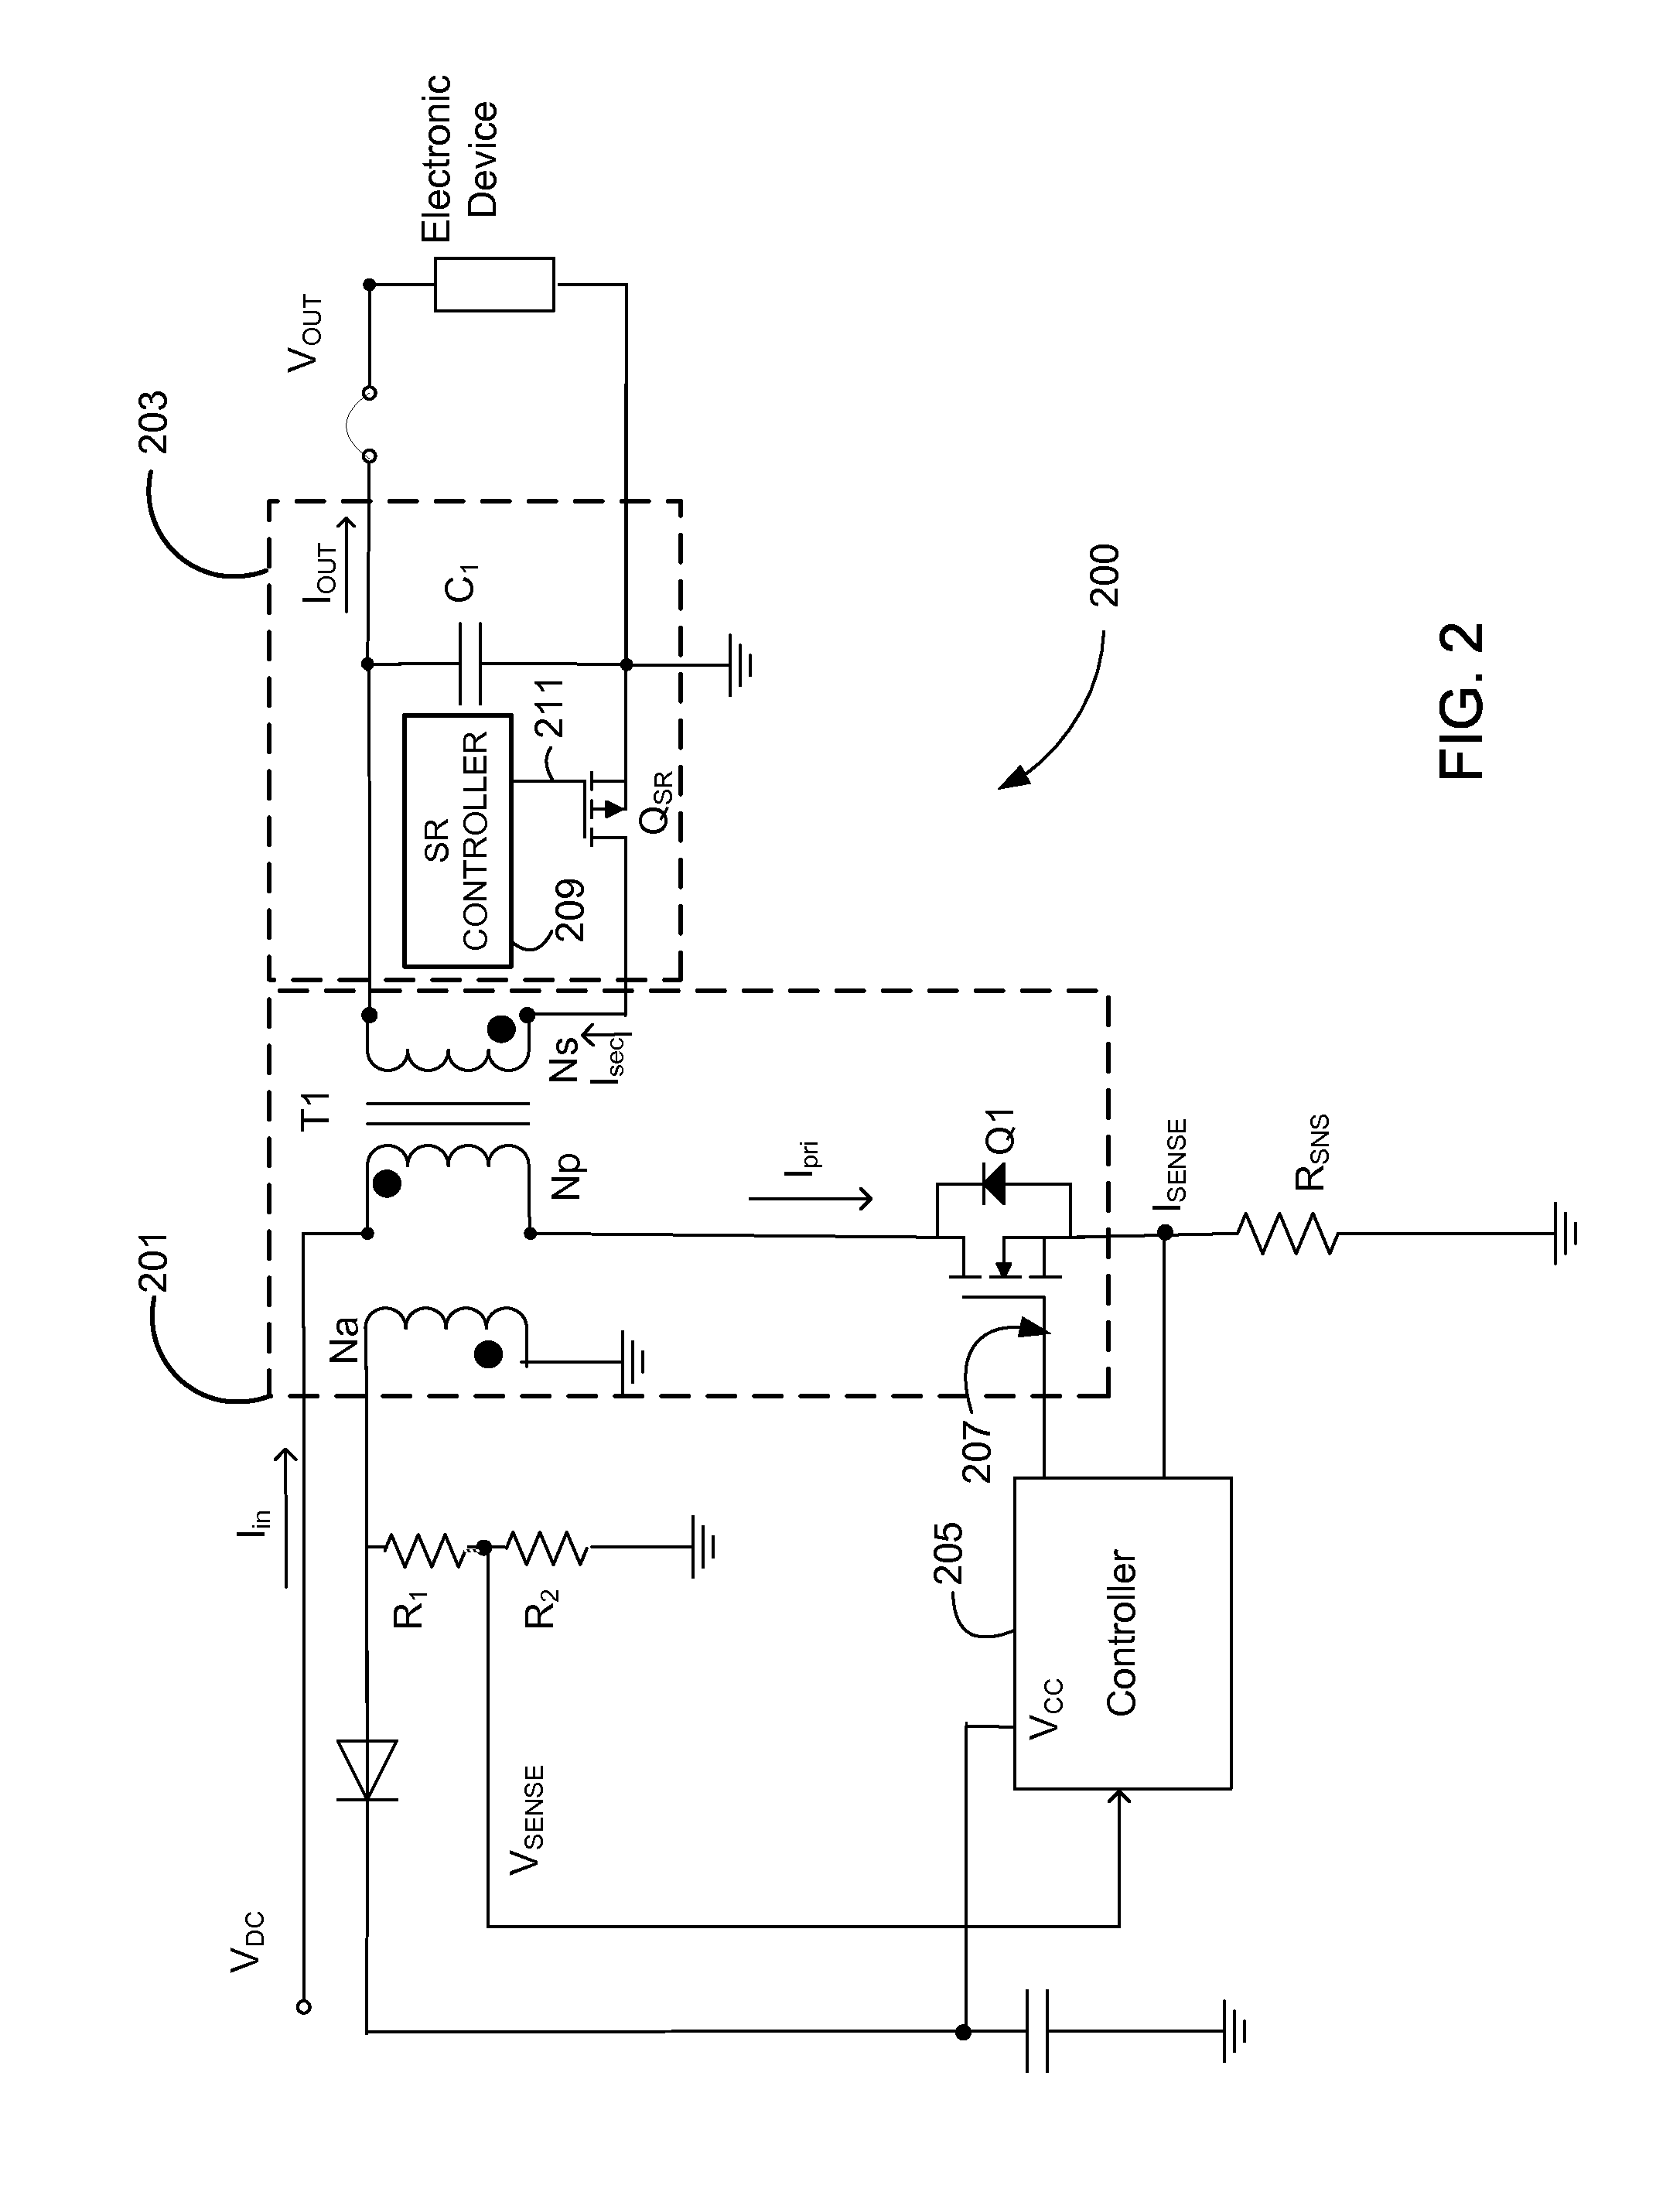 Adaptive synchronous rectifier control